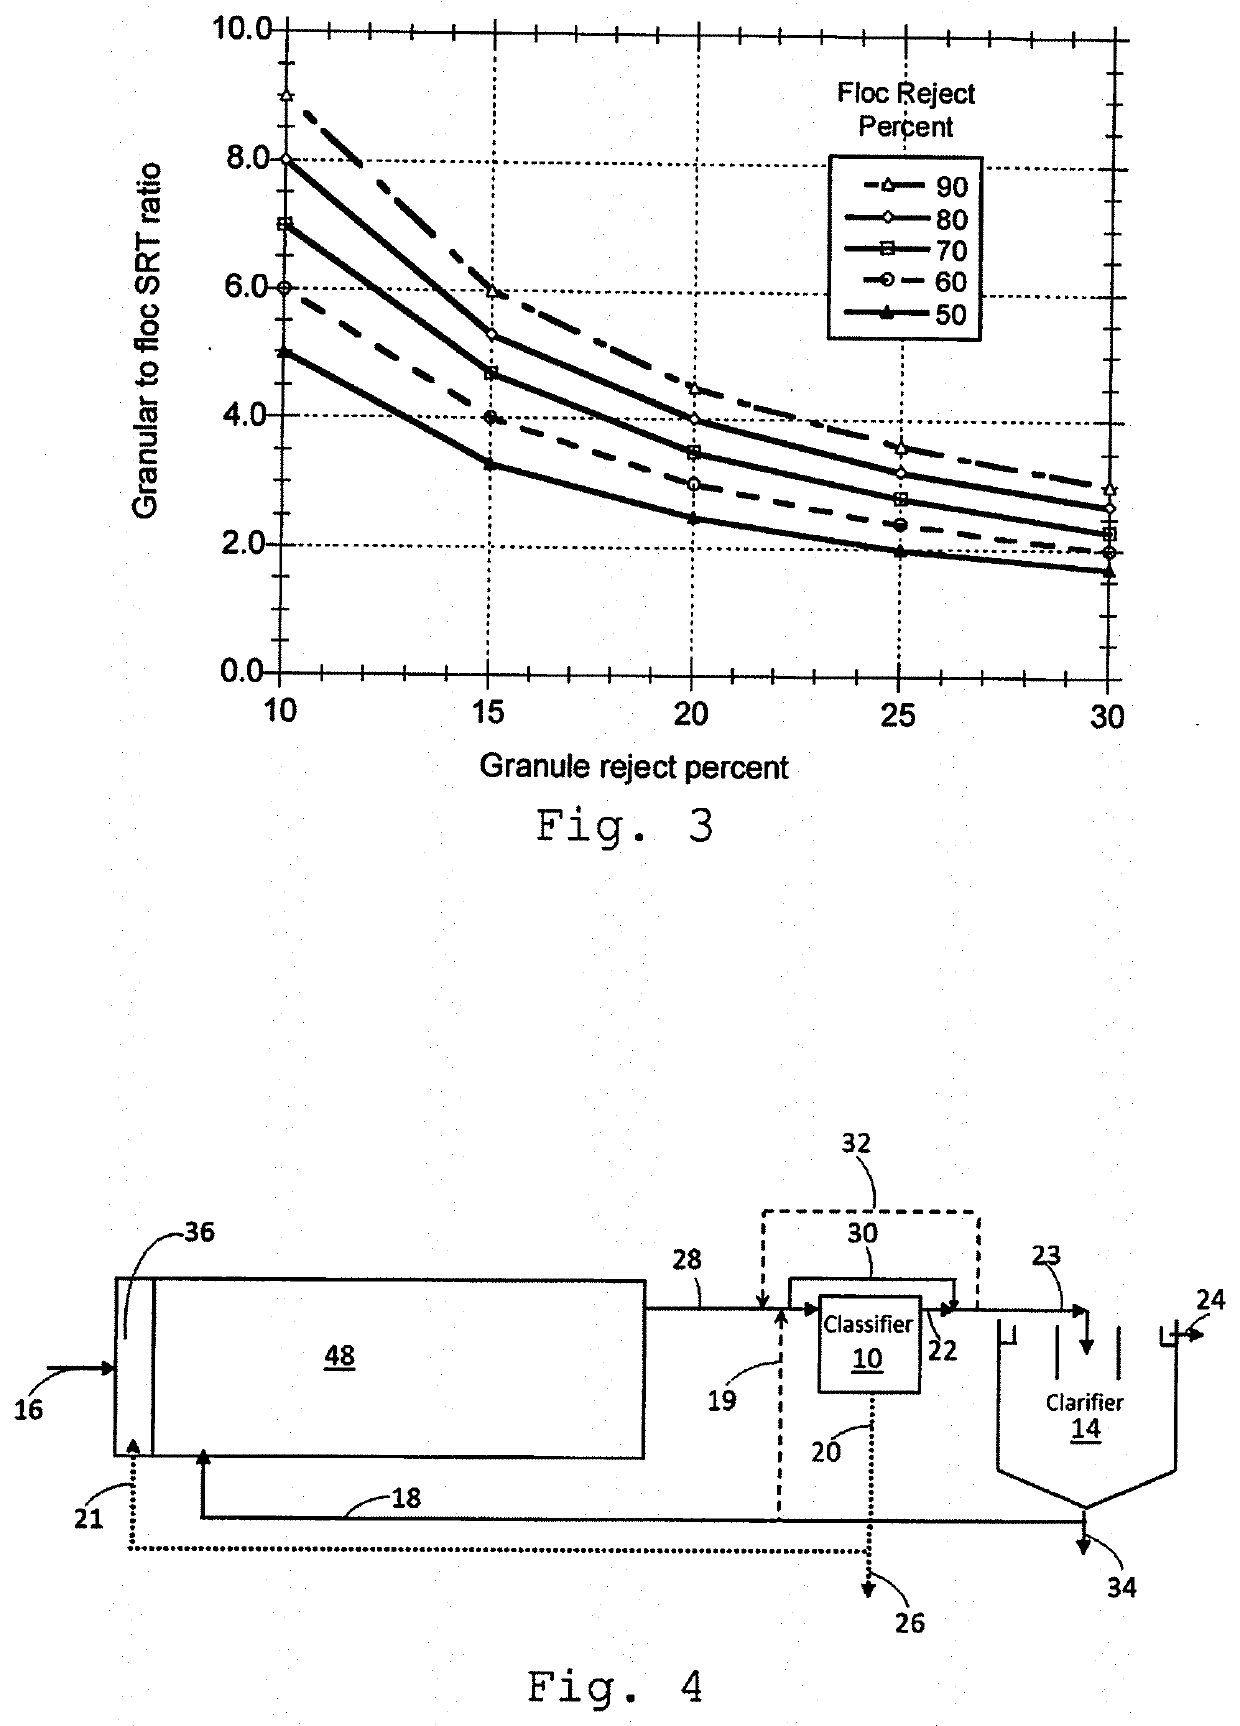 Biomass selection and control for continuous flow granular/flocculent activated sludge processes